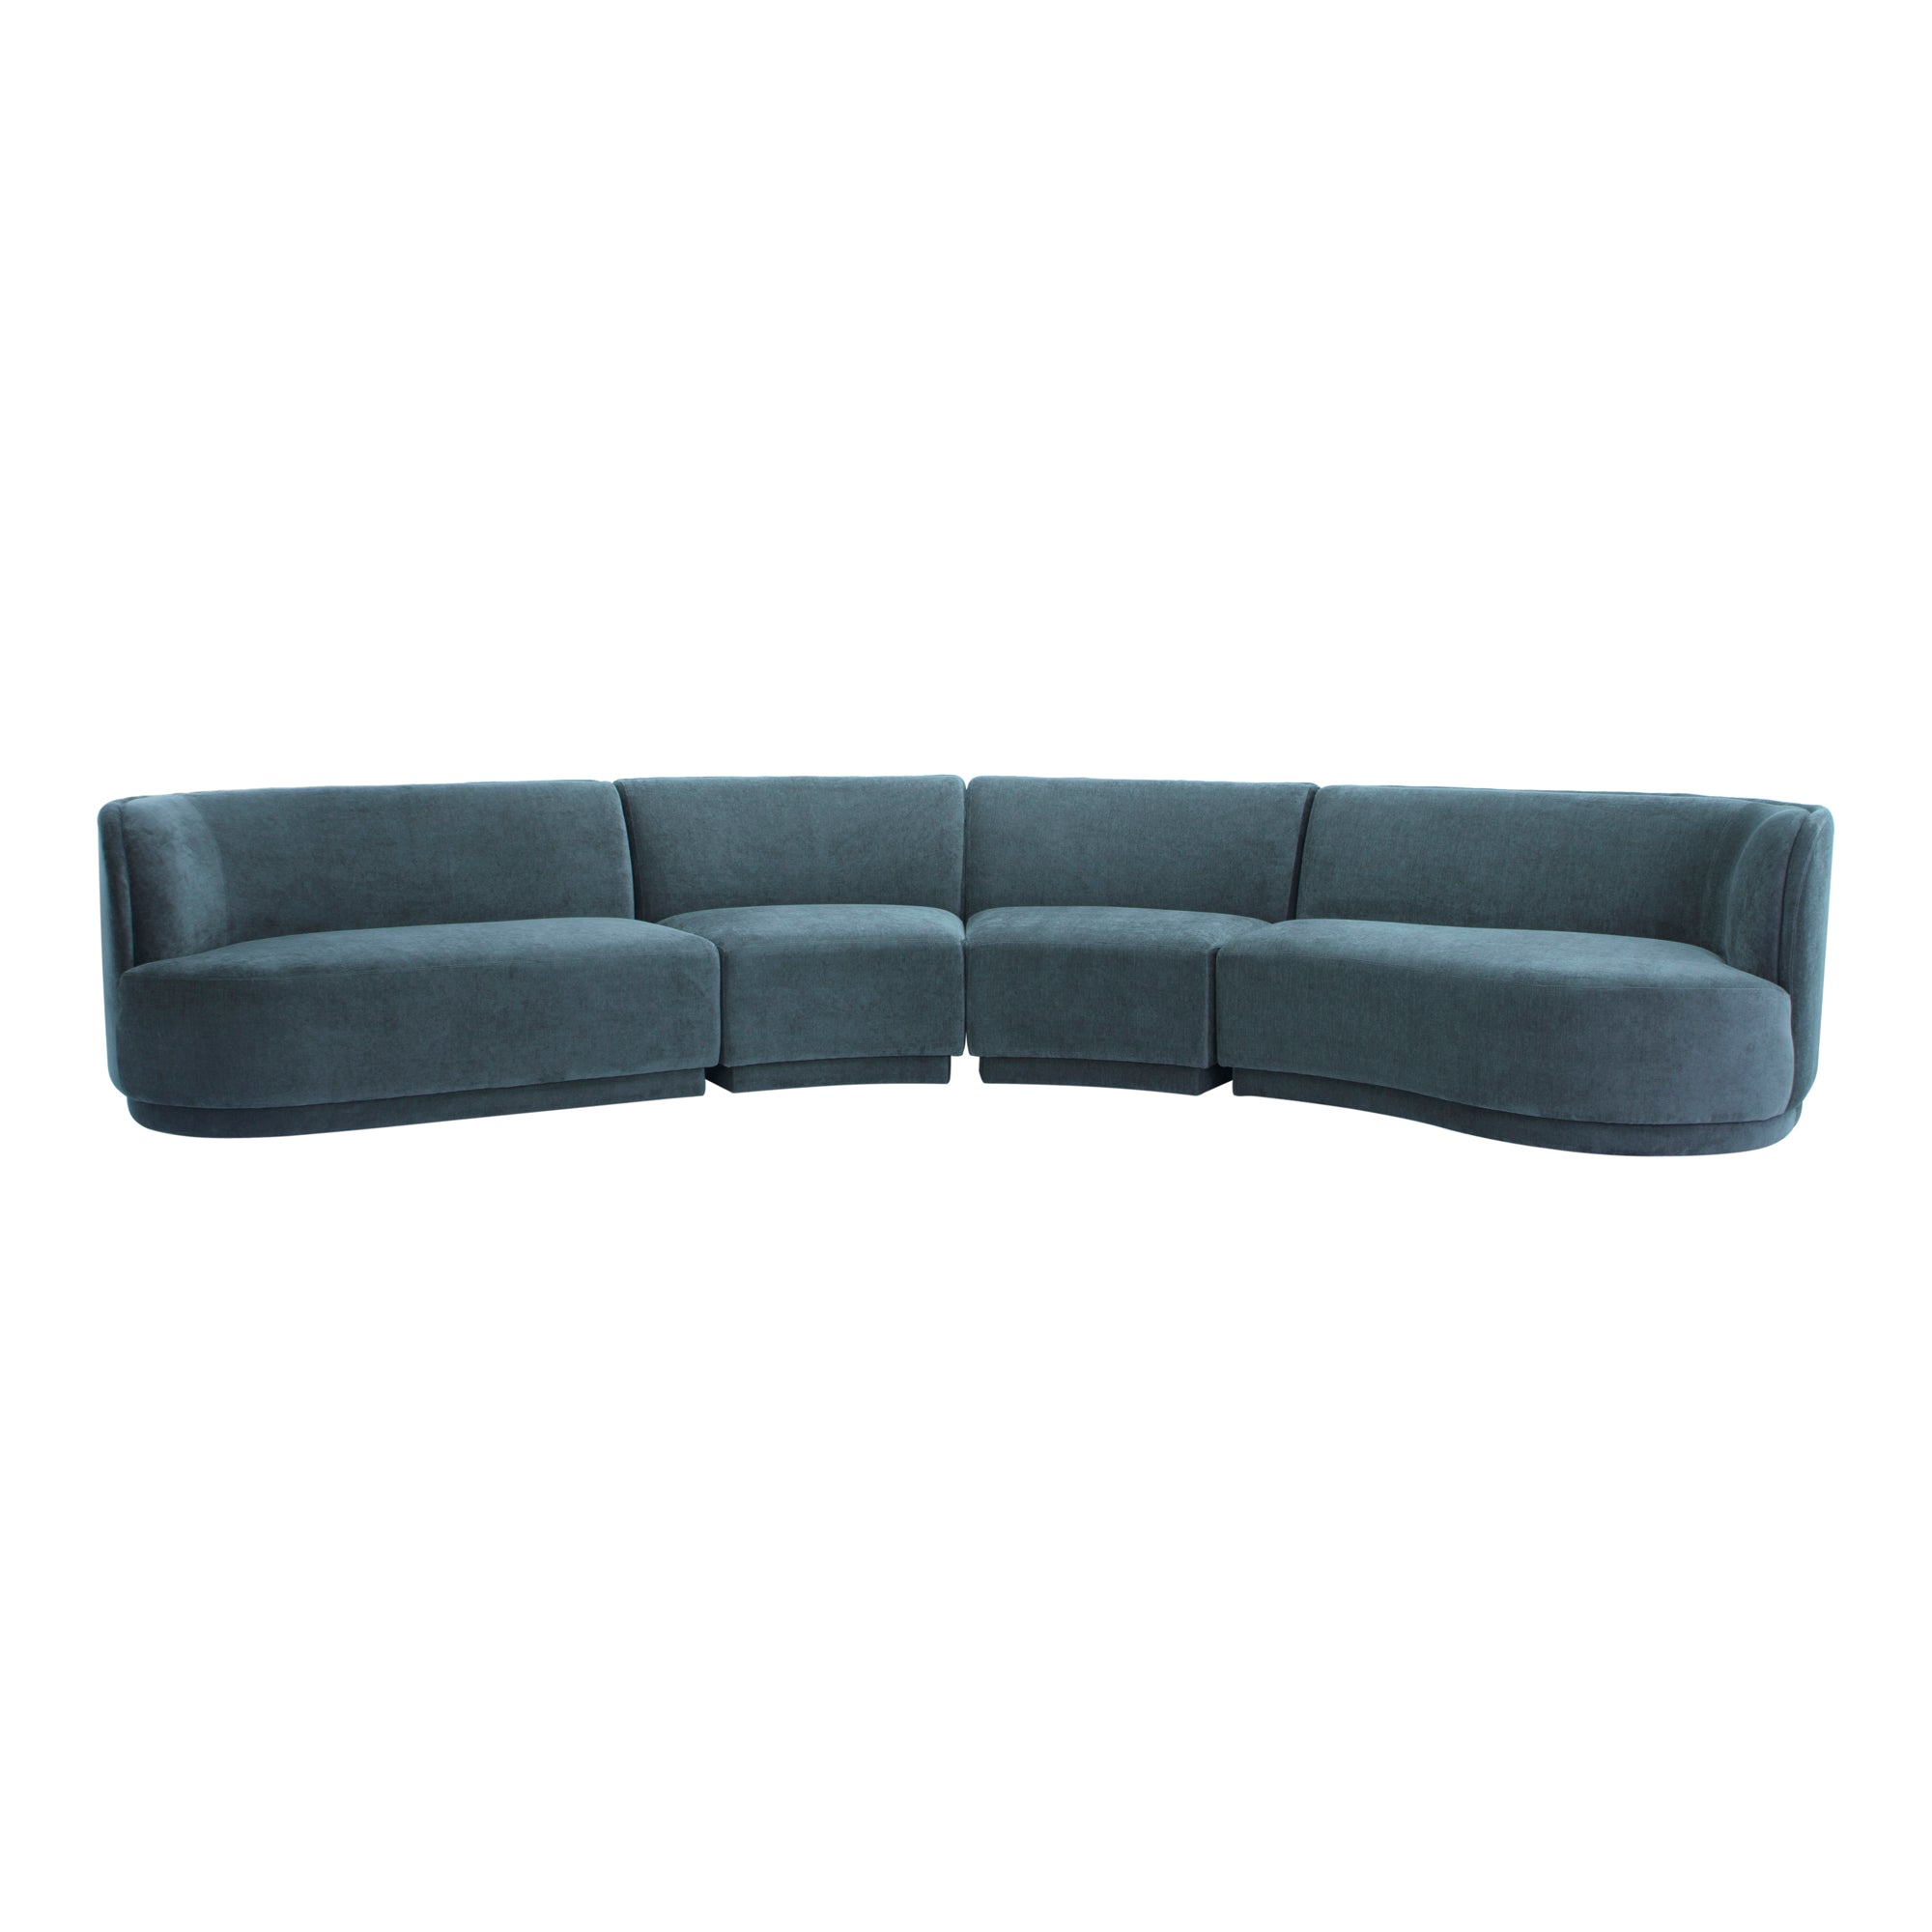 Yoon Eclipse Modular Sectional Right Chaise Nightshade Blue | Blue